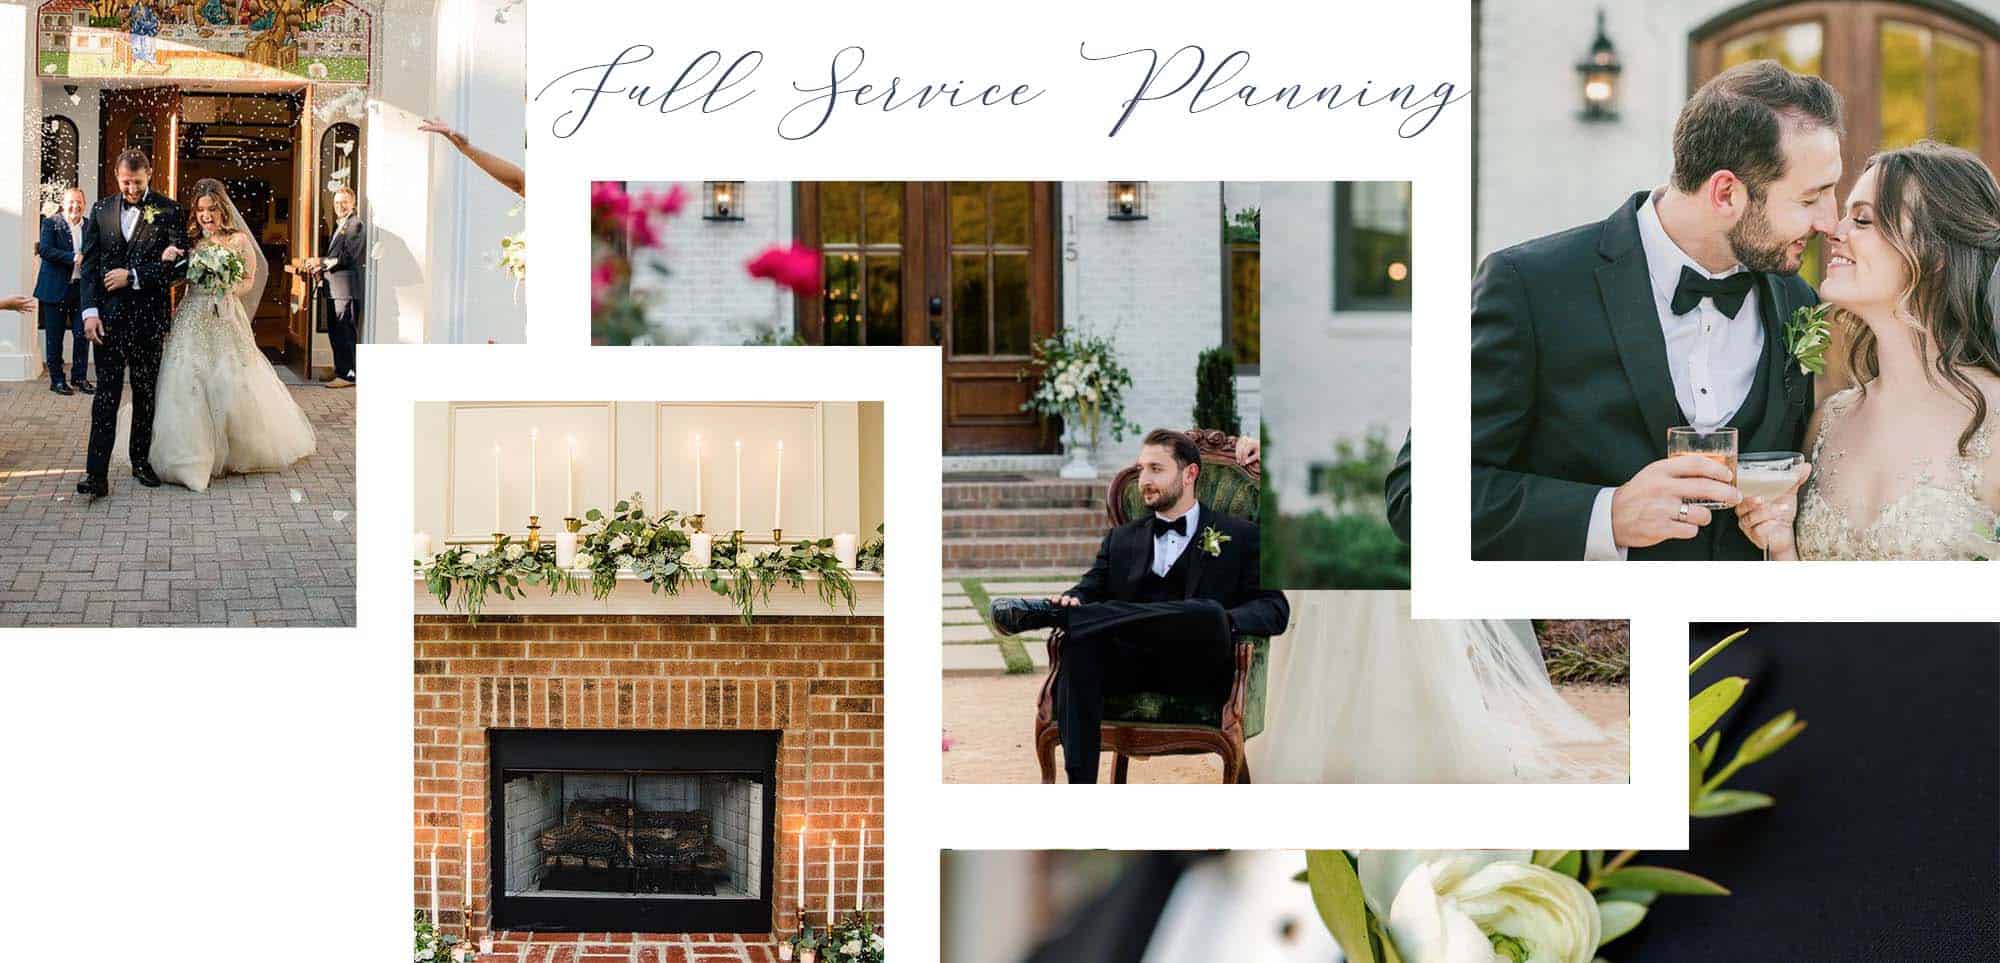 Full Service Planning – Premier Party Planners